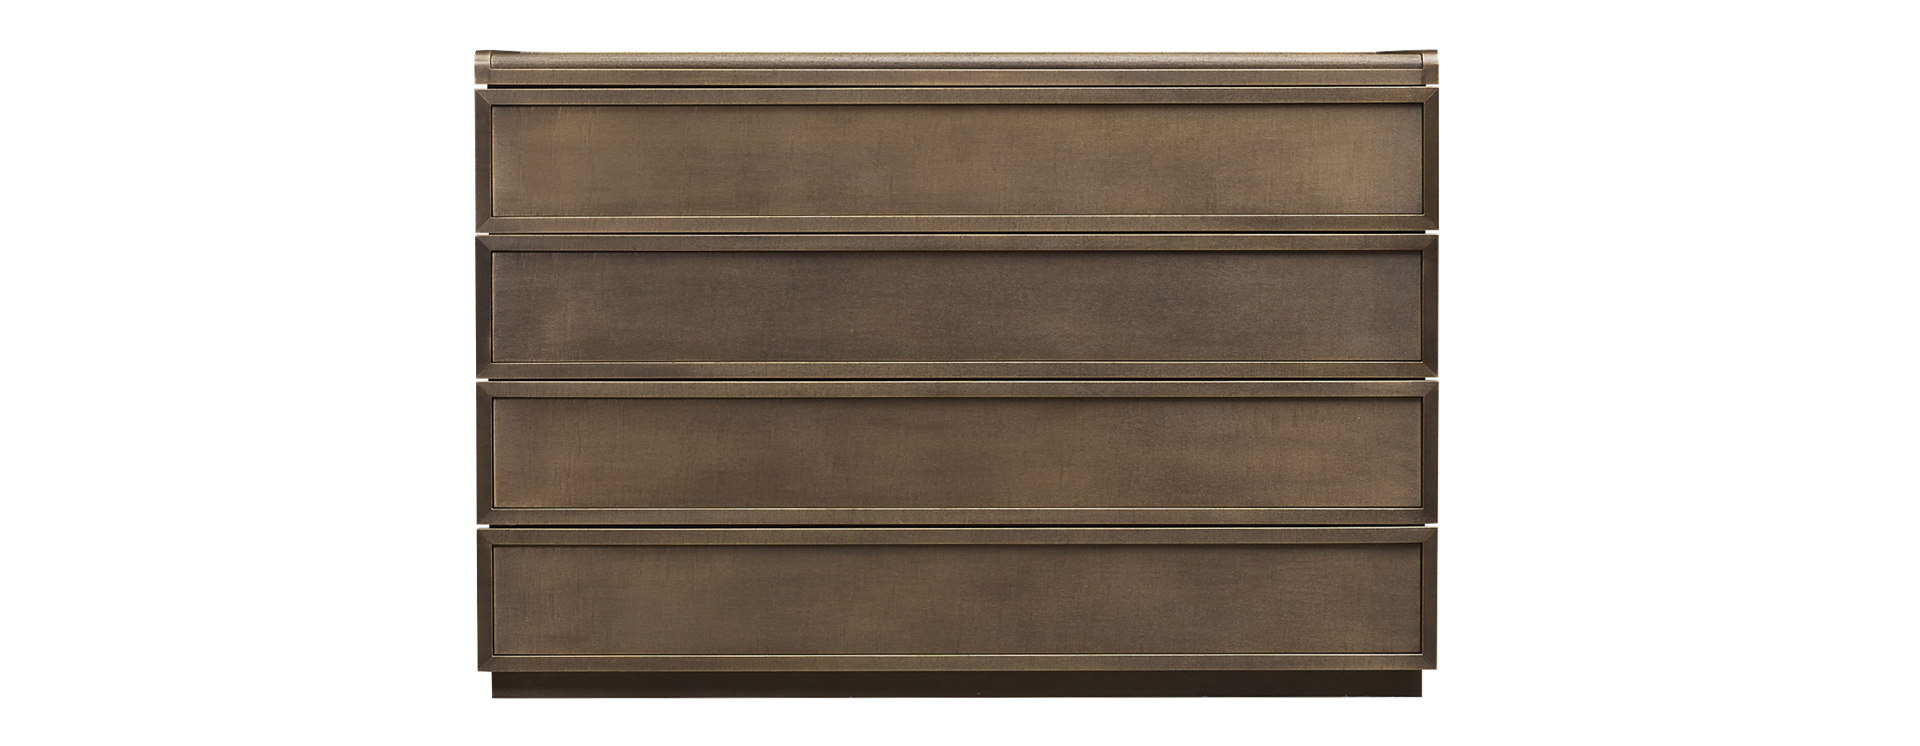 /mediaOrione%20is%20a%20wooden%20chest%20of%20drawers%20covered%20in%20leather,%20from%20Promemoria's%20catalogue%20|%20Promemoria